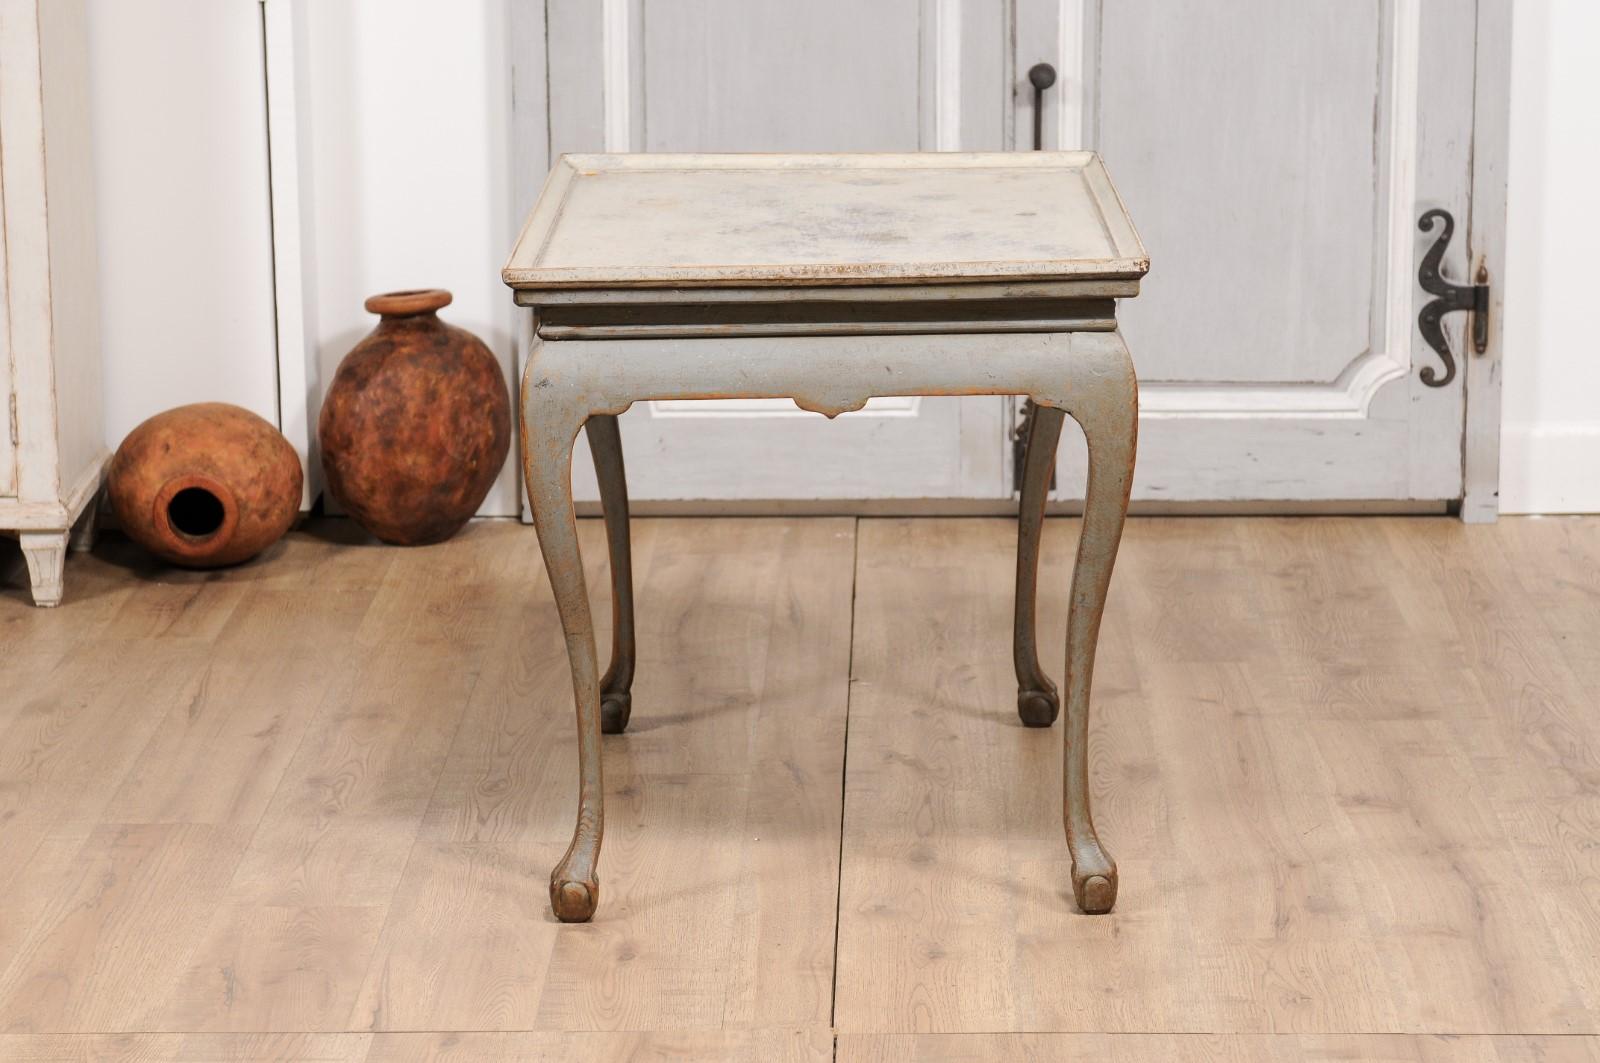 1750s Swedish Rococo Gray Painted Tea Table with Tray Top and Ball and Claw Feet In Good Condition For Sale In Atlanta, GA